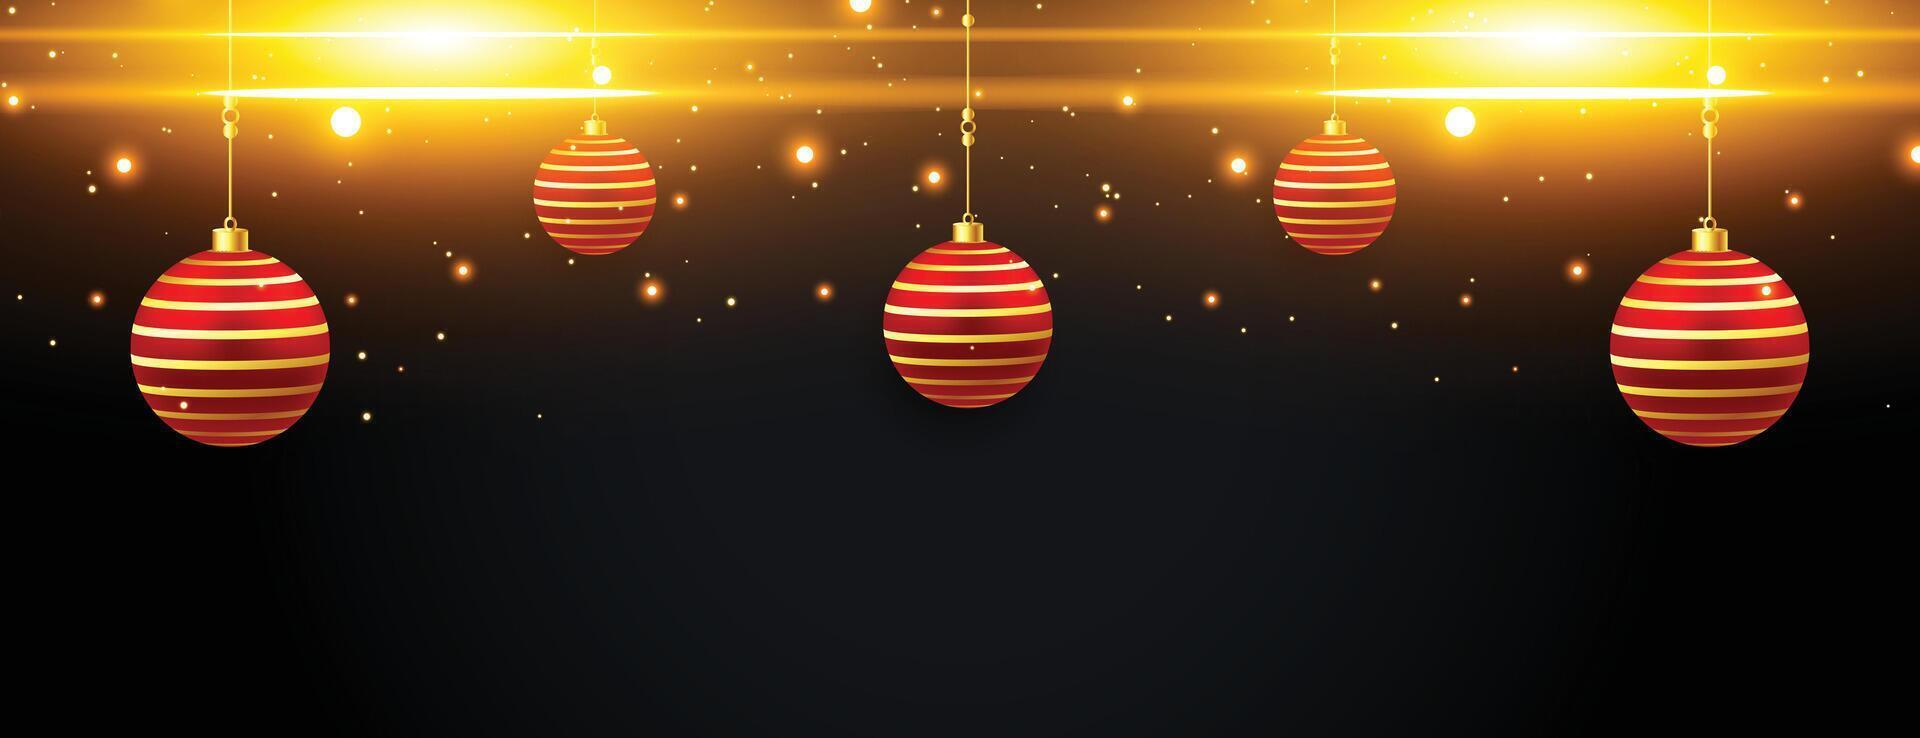 merry christmas sparkles banner with red golden balls vector